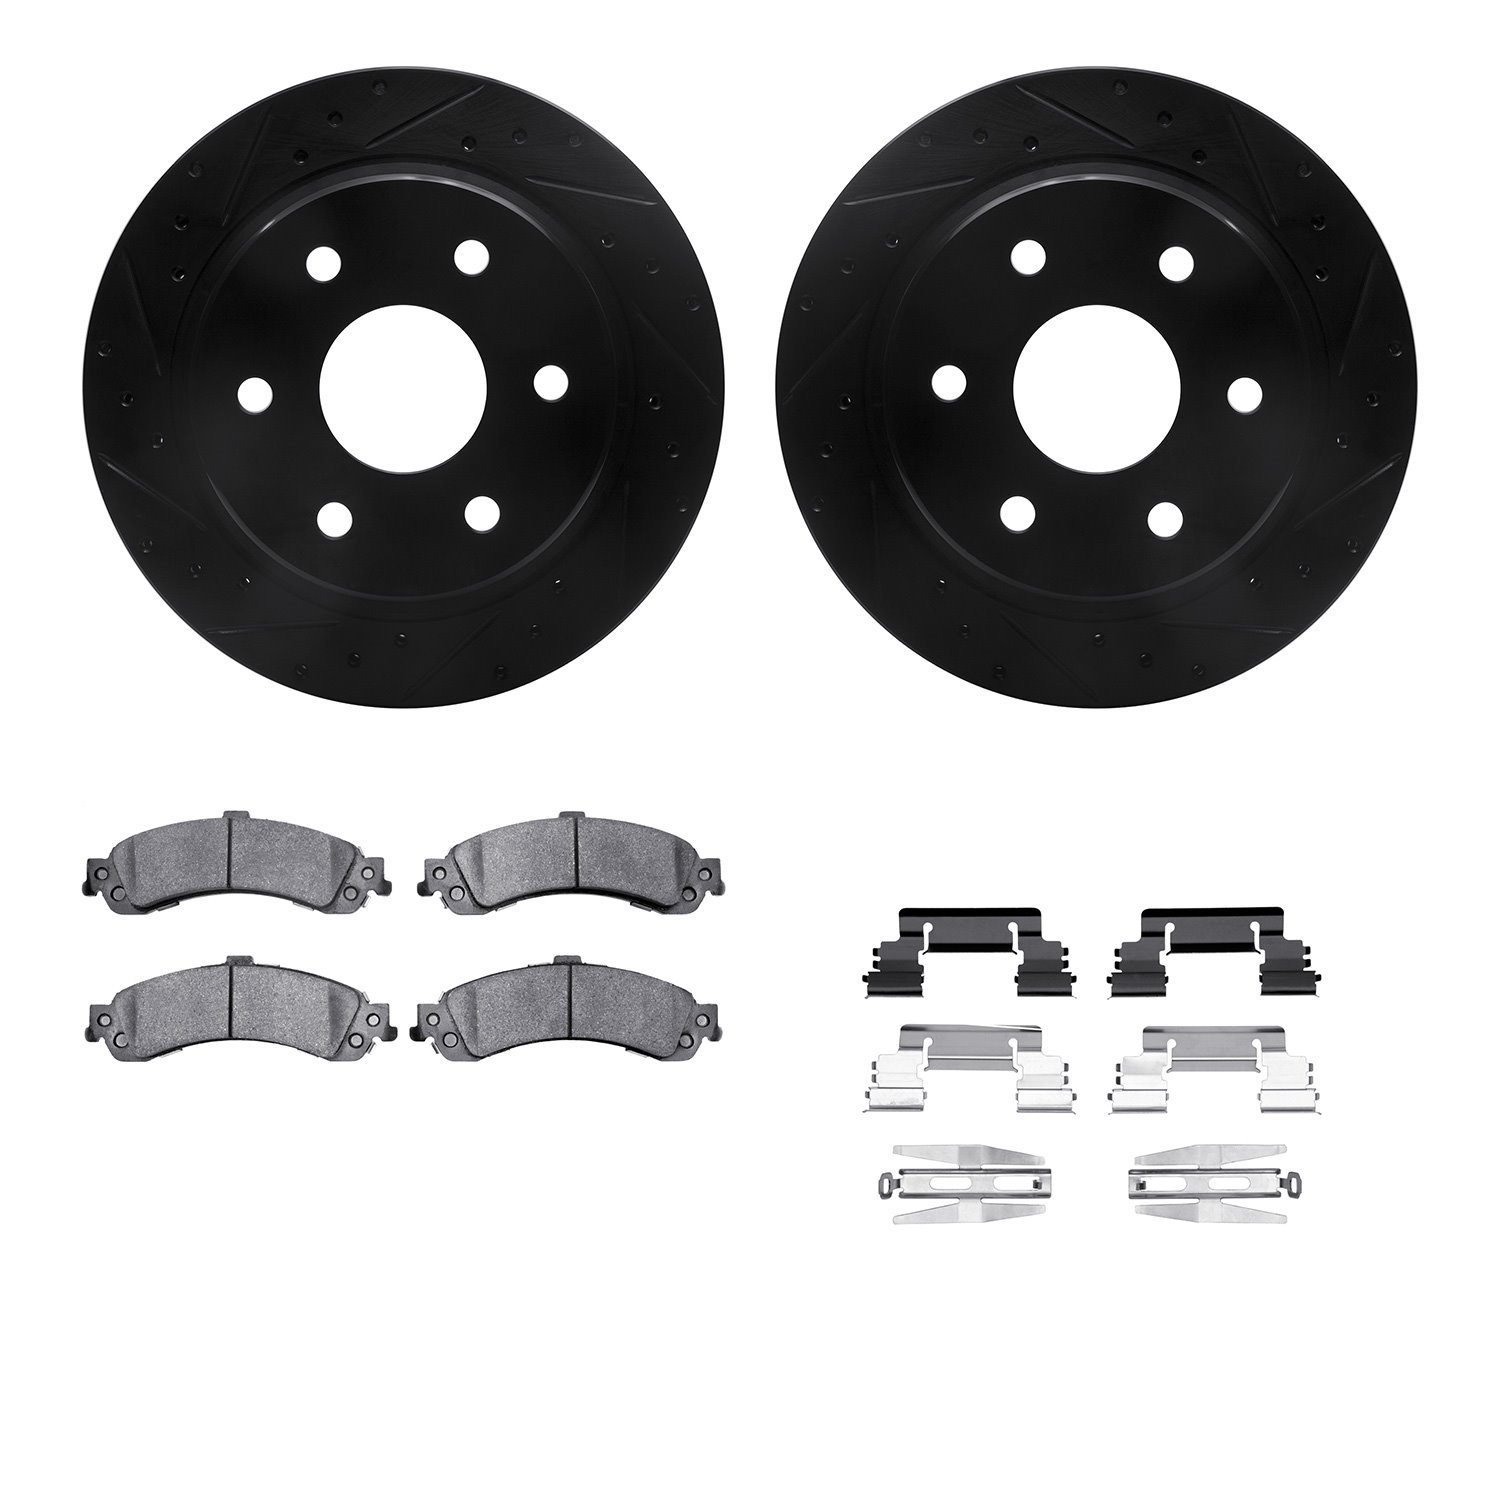 8412-48028 Drilled/Slotted Brake Rotors with Ultimate-Duty Brake Pads Kit & Hardware [Black], 2000-2006 GM, Position: Rear